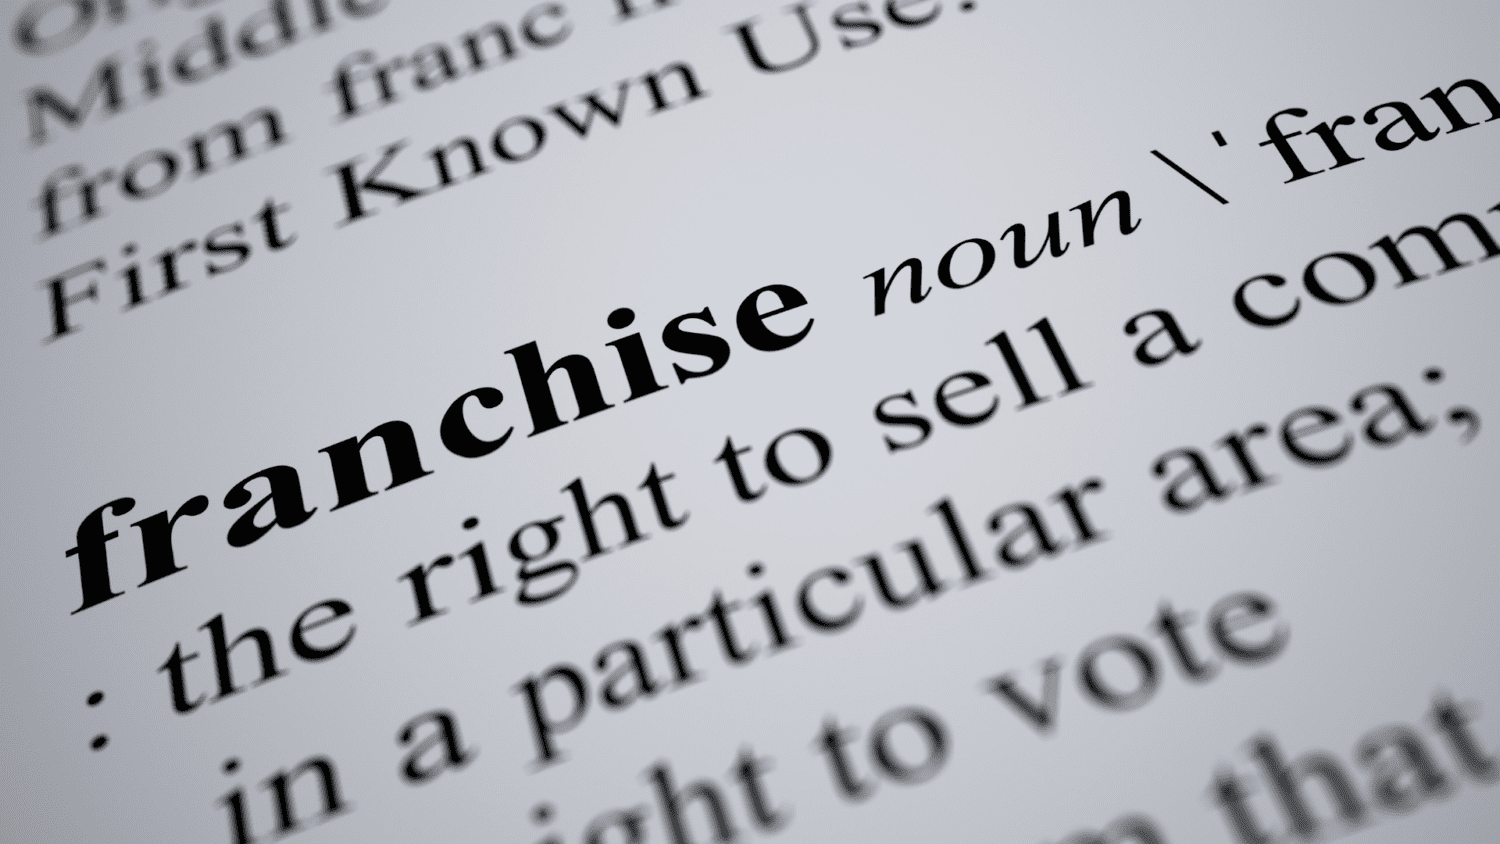 Franchise Opportunities: The Complete Guide